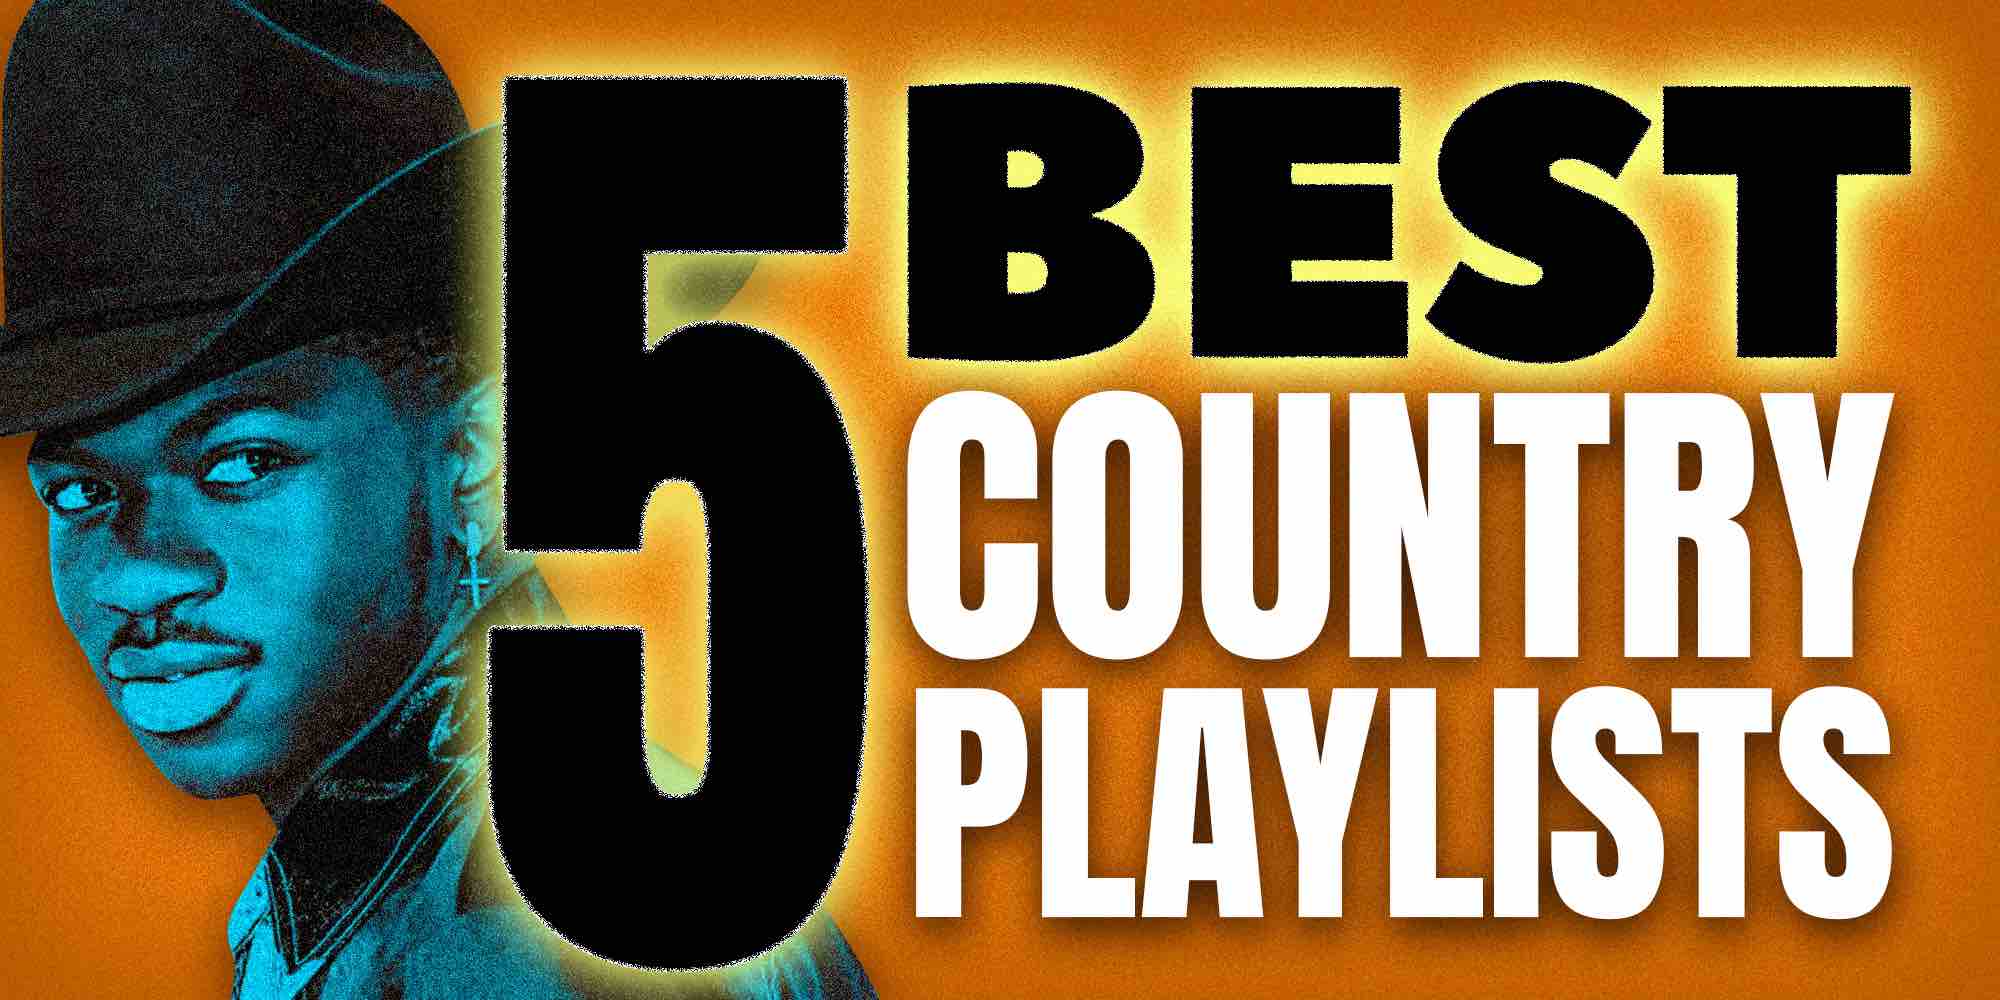 5 Best Country Spotify Playlists to Submit Music!